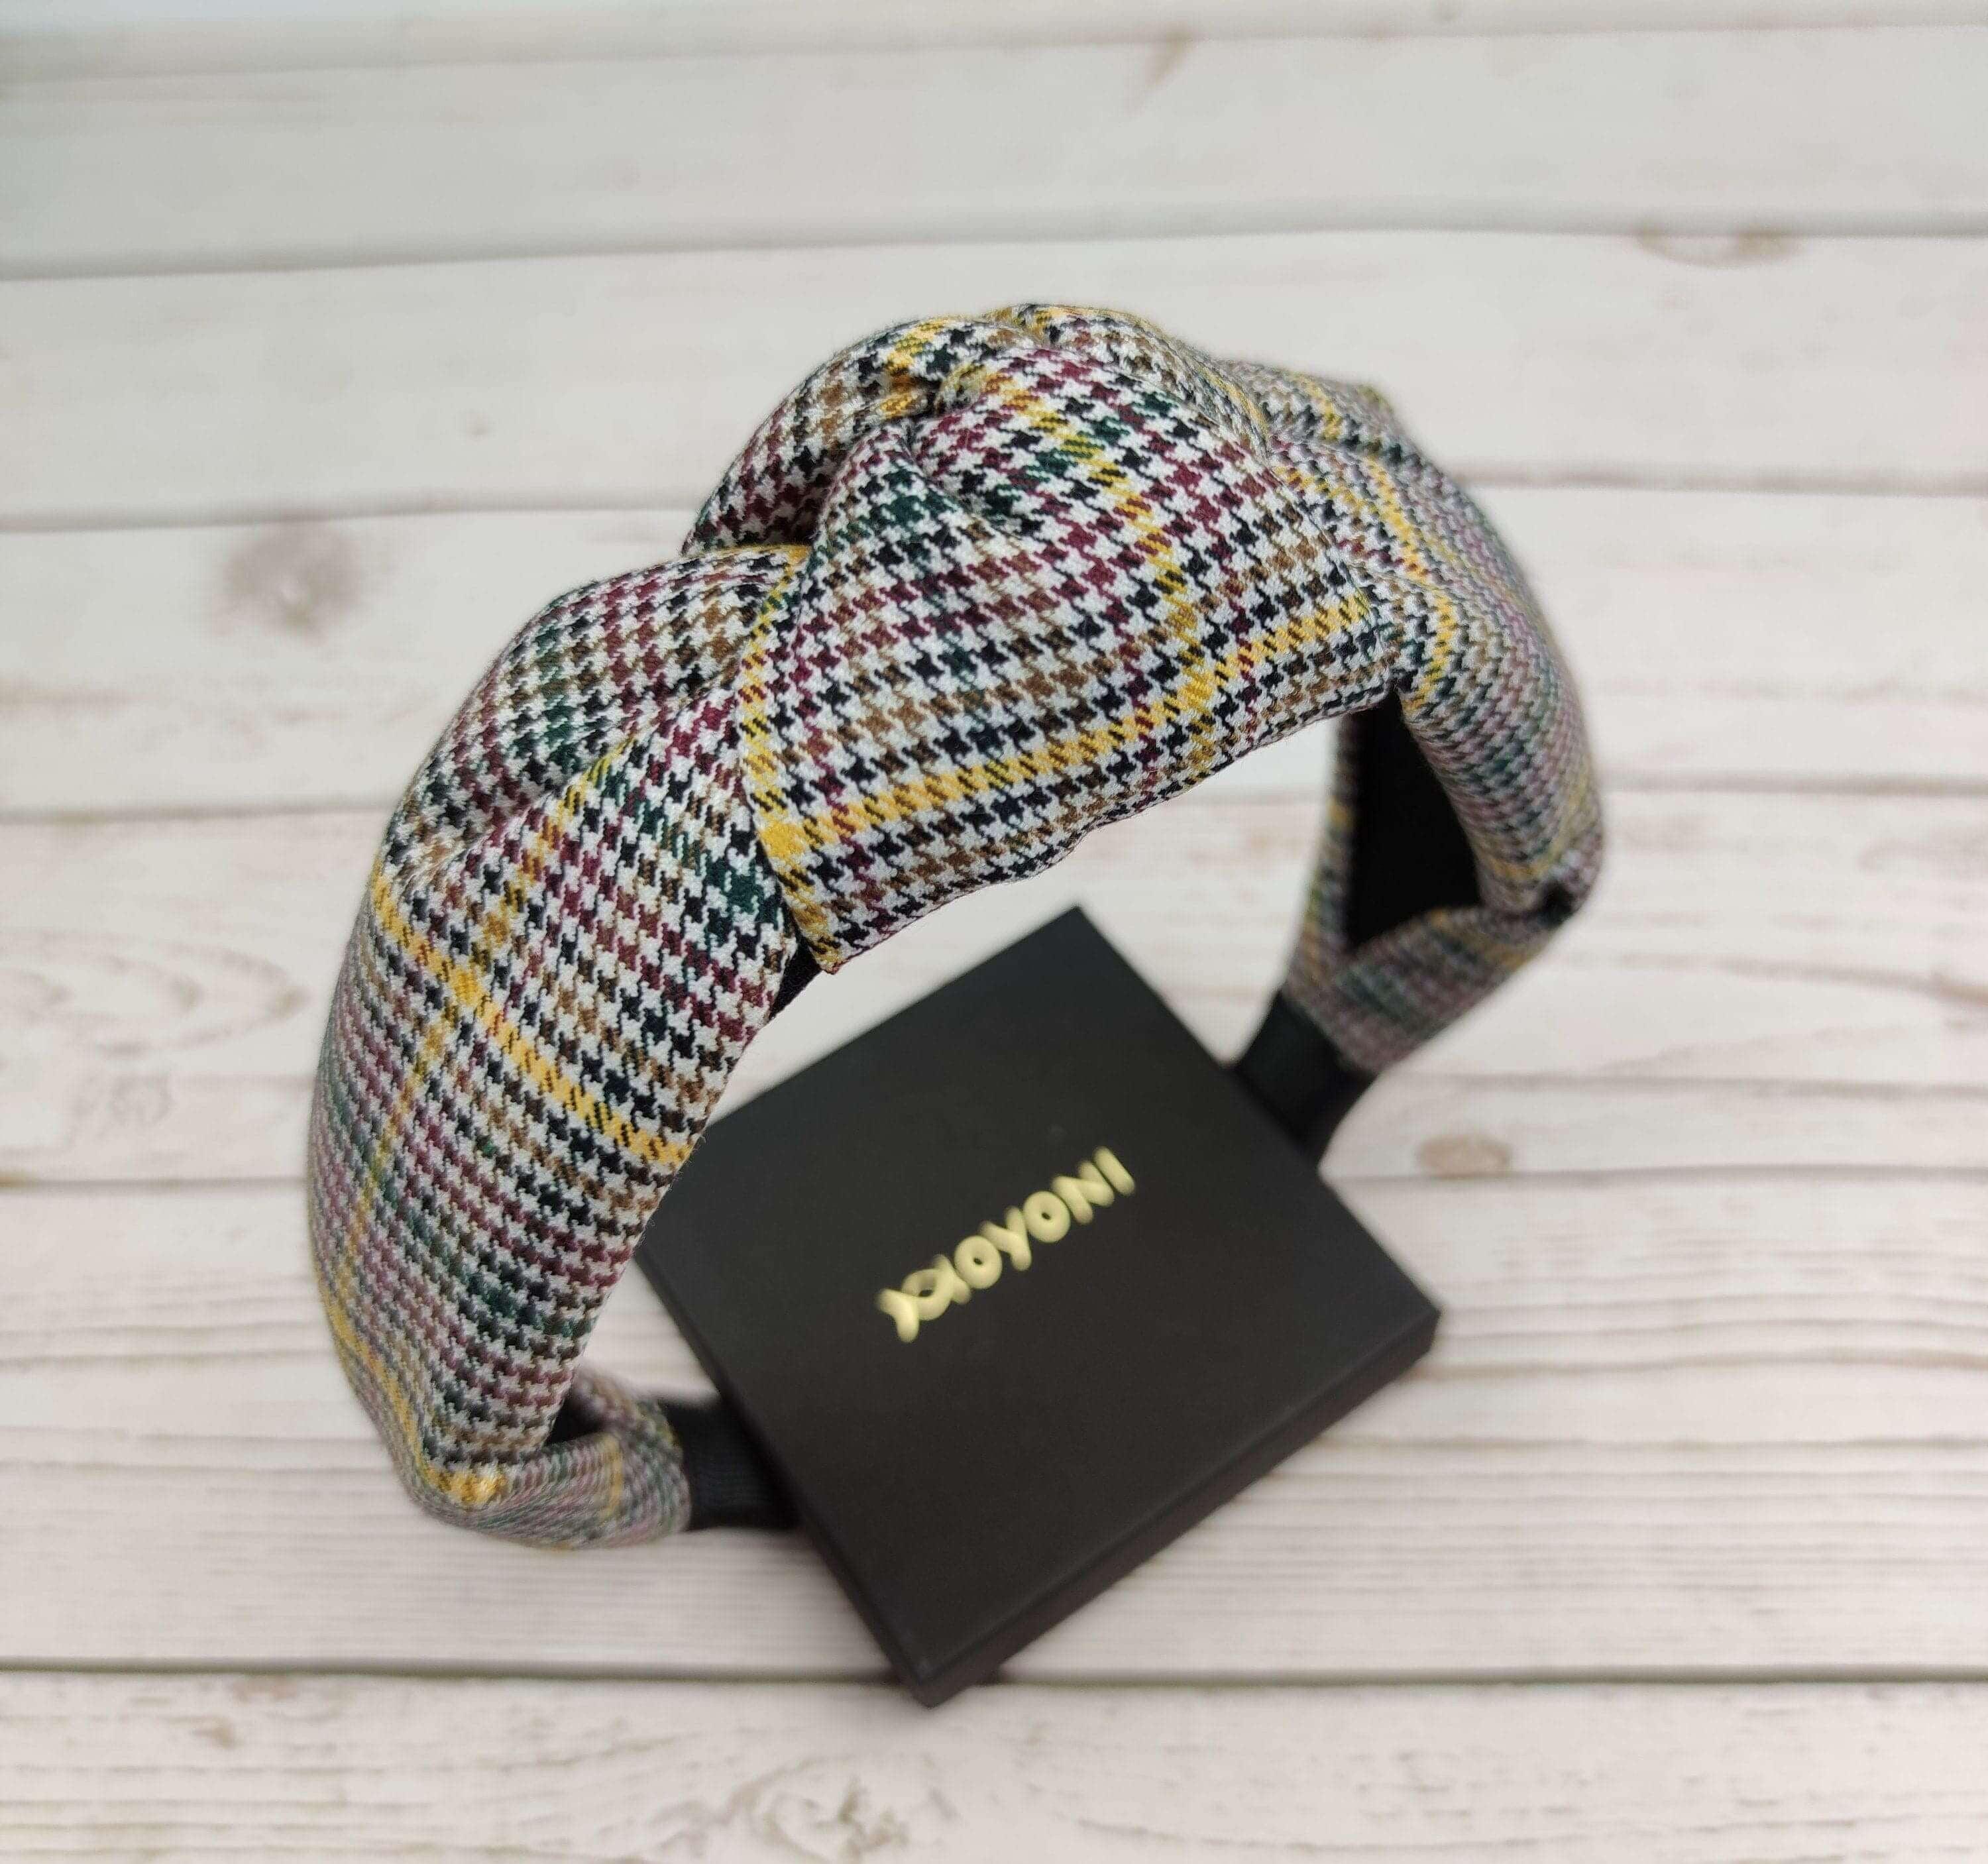 Premium White and Black Crepe Knotted Headband - Classic, Fashionable Houndstooth Hair Accessory for College with Yellow, Green and Brown Stripes available at Moyoni Design